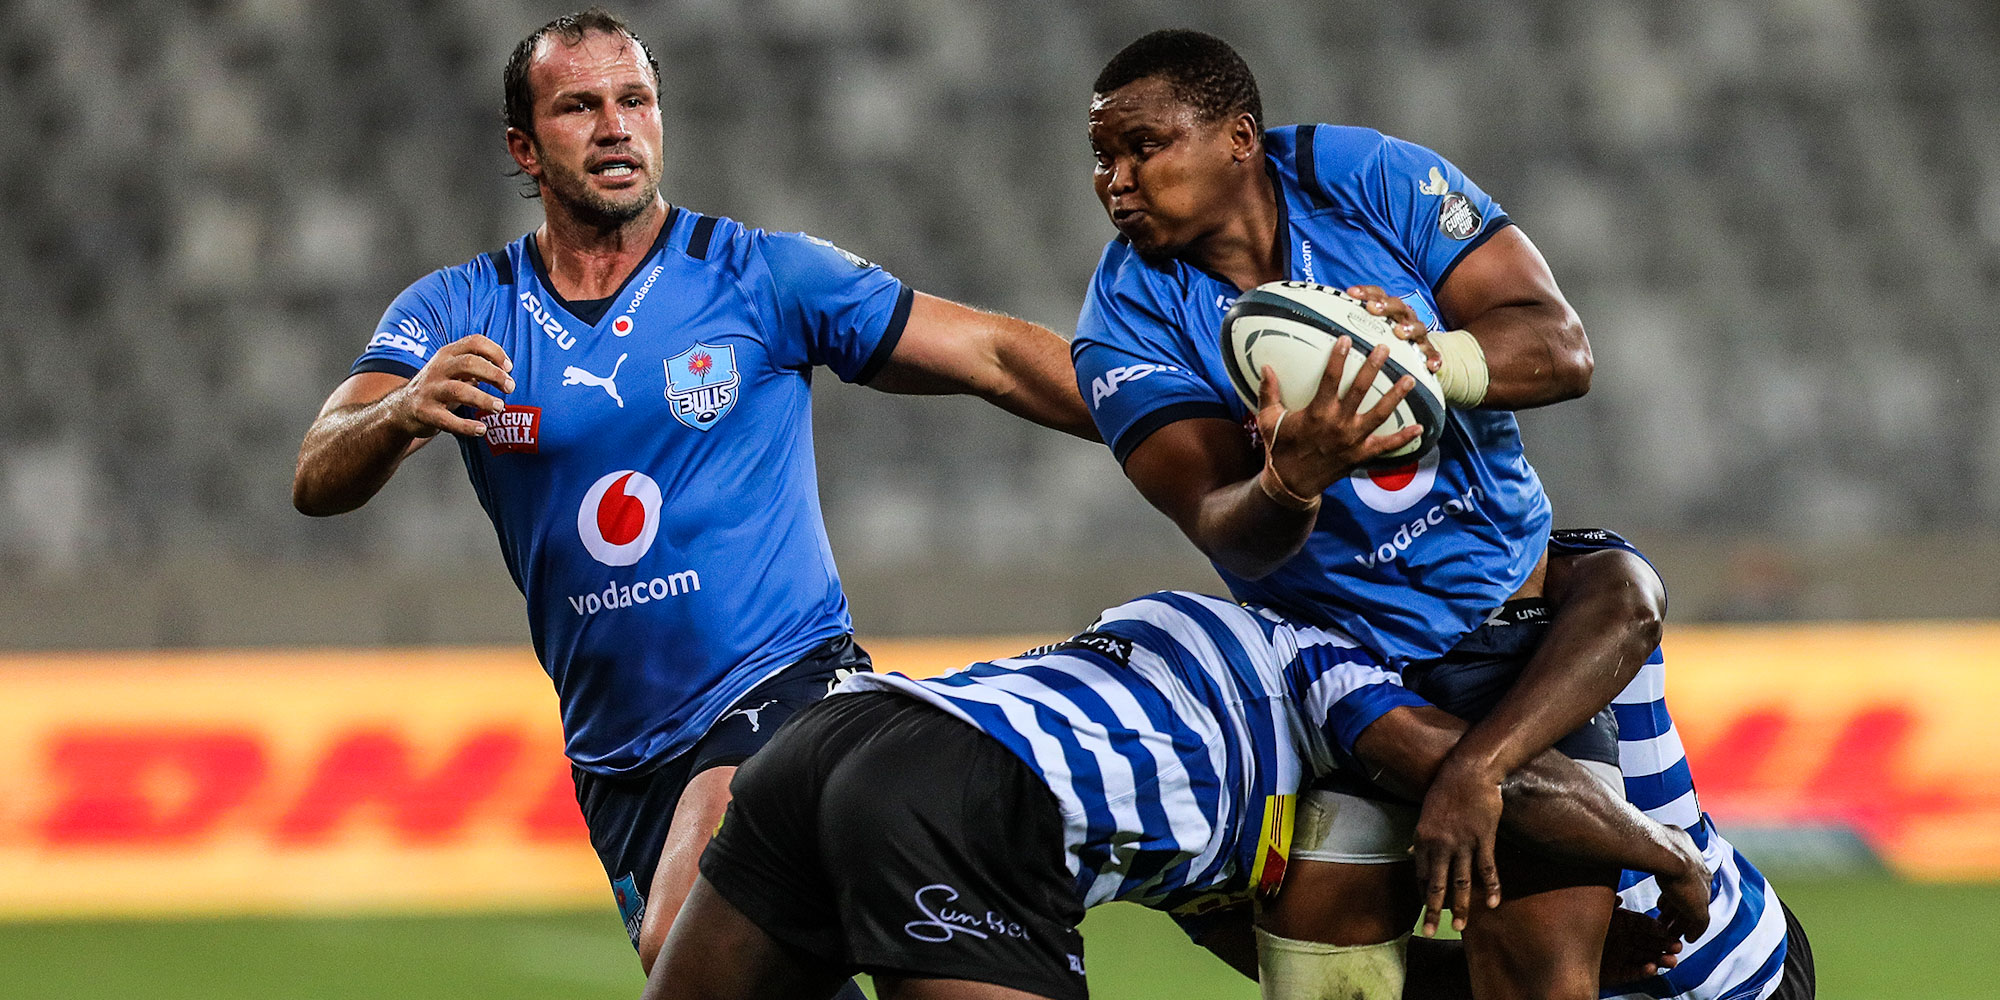 Bismarck du Plessis and Simphiwe Matanzima were in great form for the Vodacom Bulls.